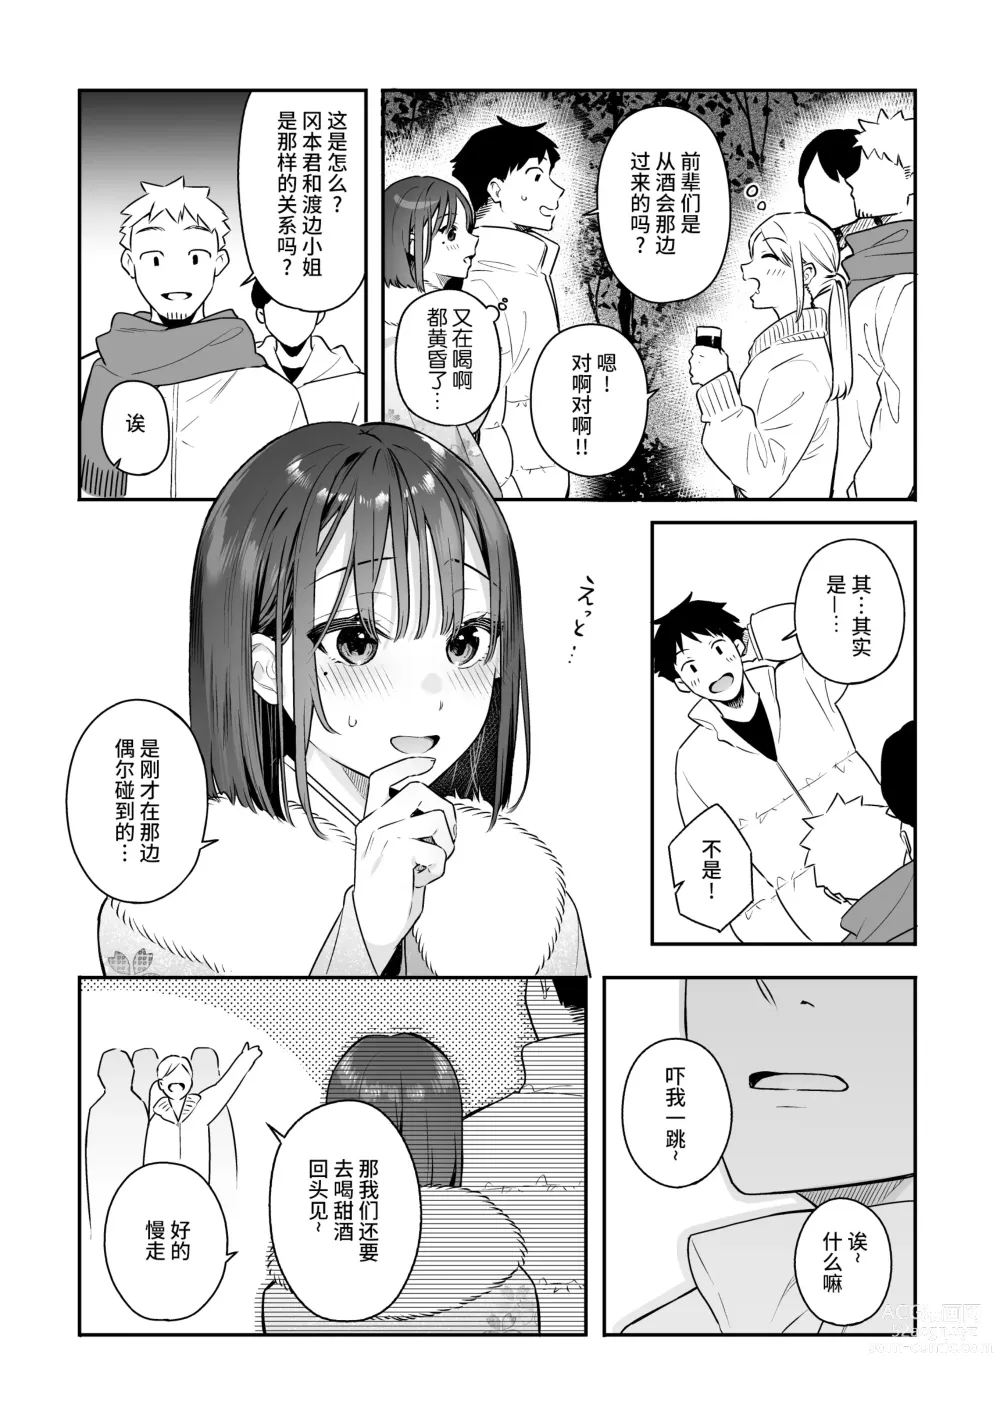 Page 11 of doujinshi 她的发情开关 2